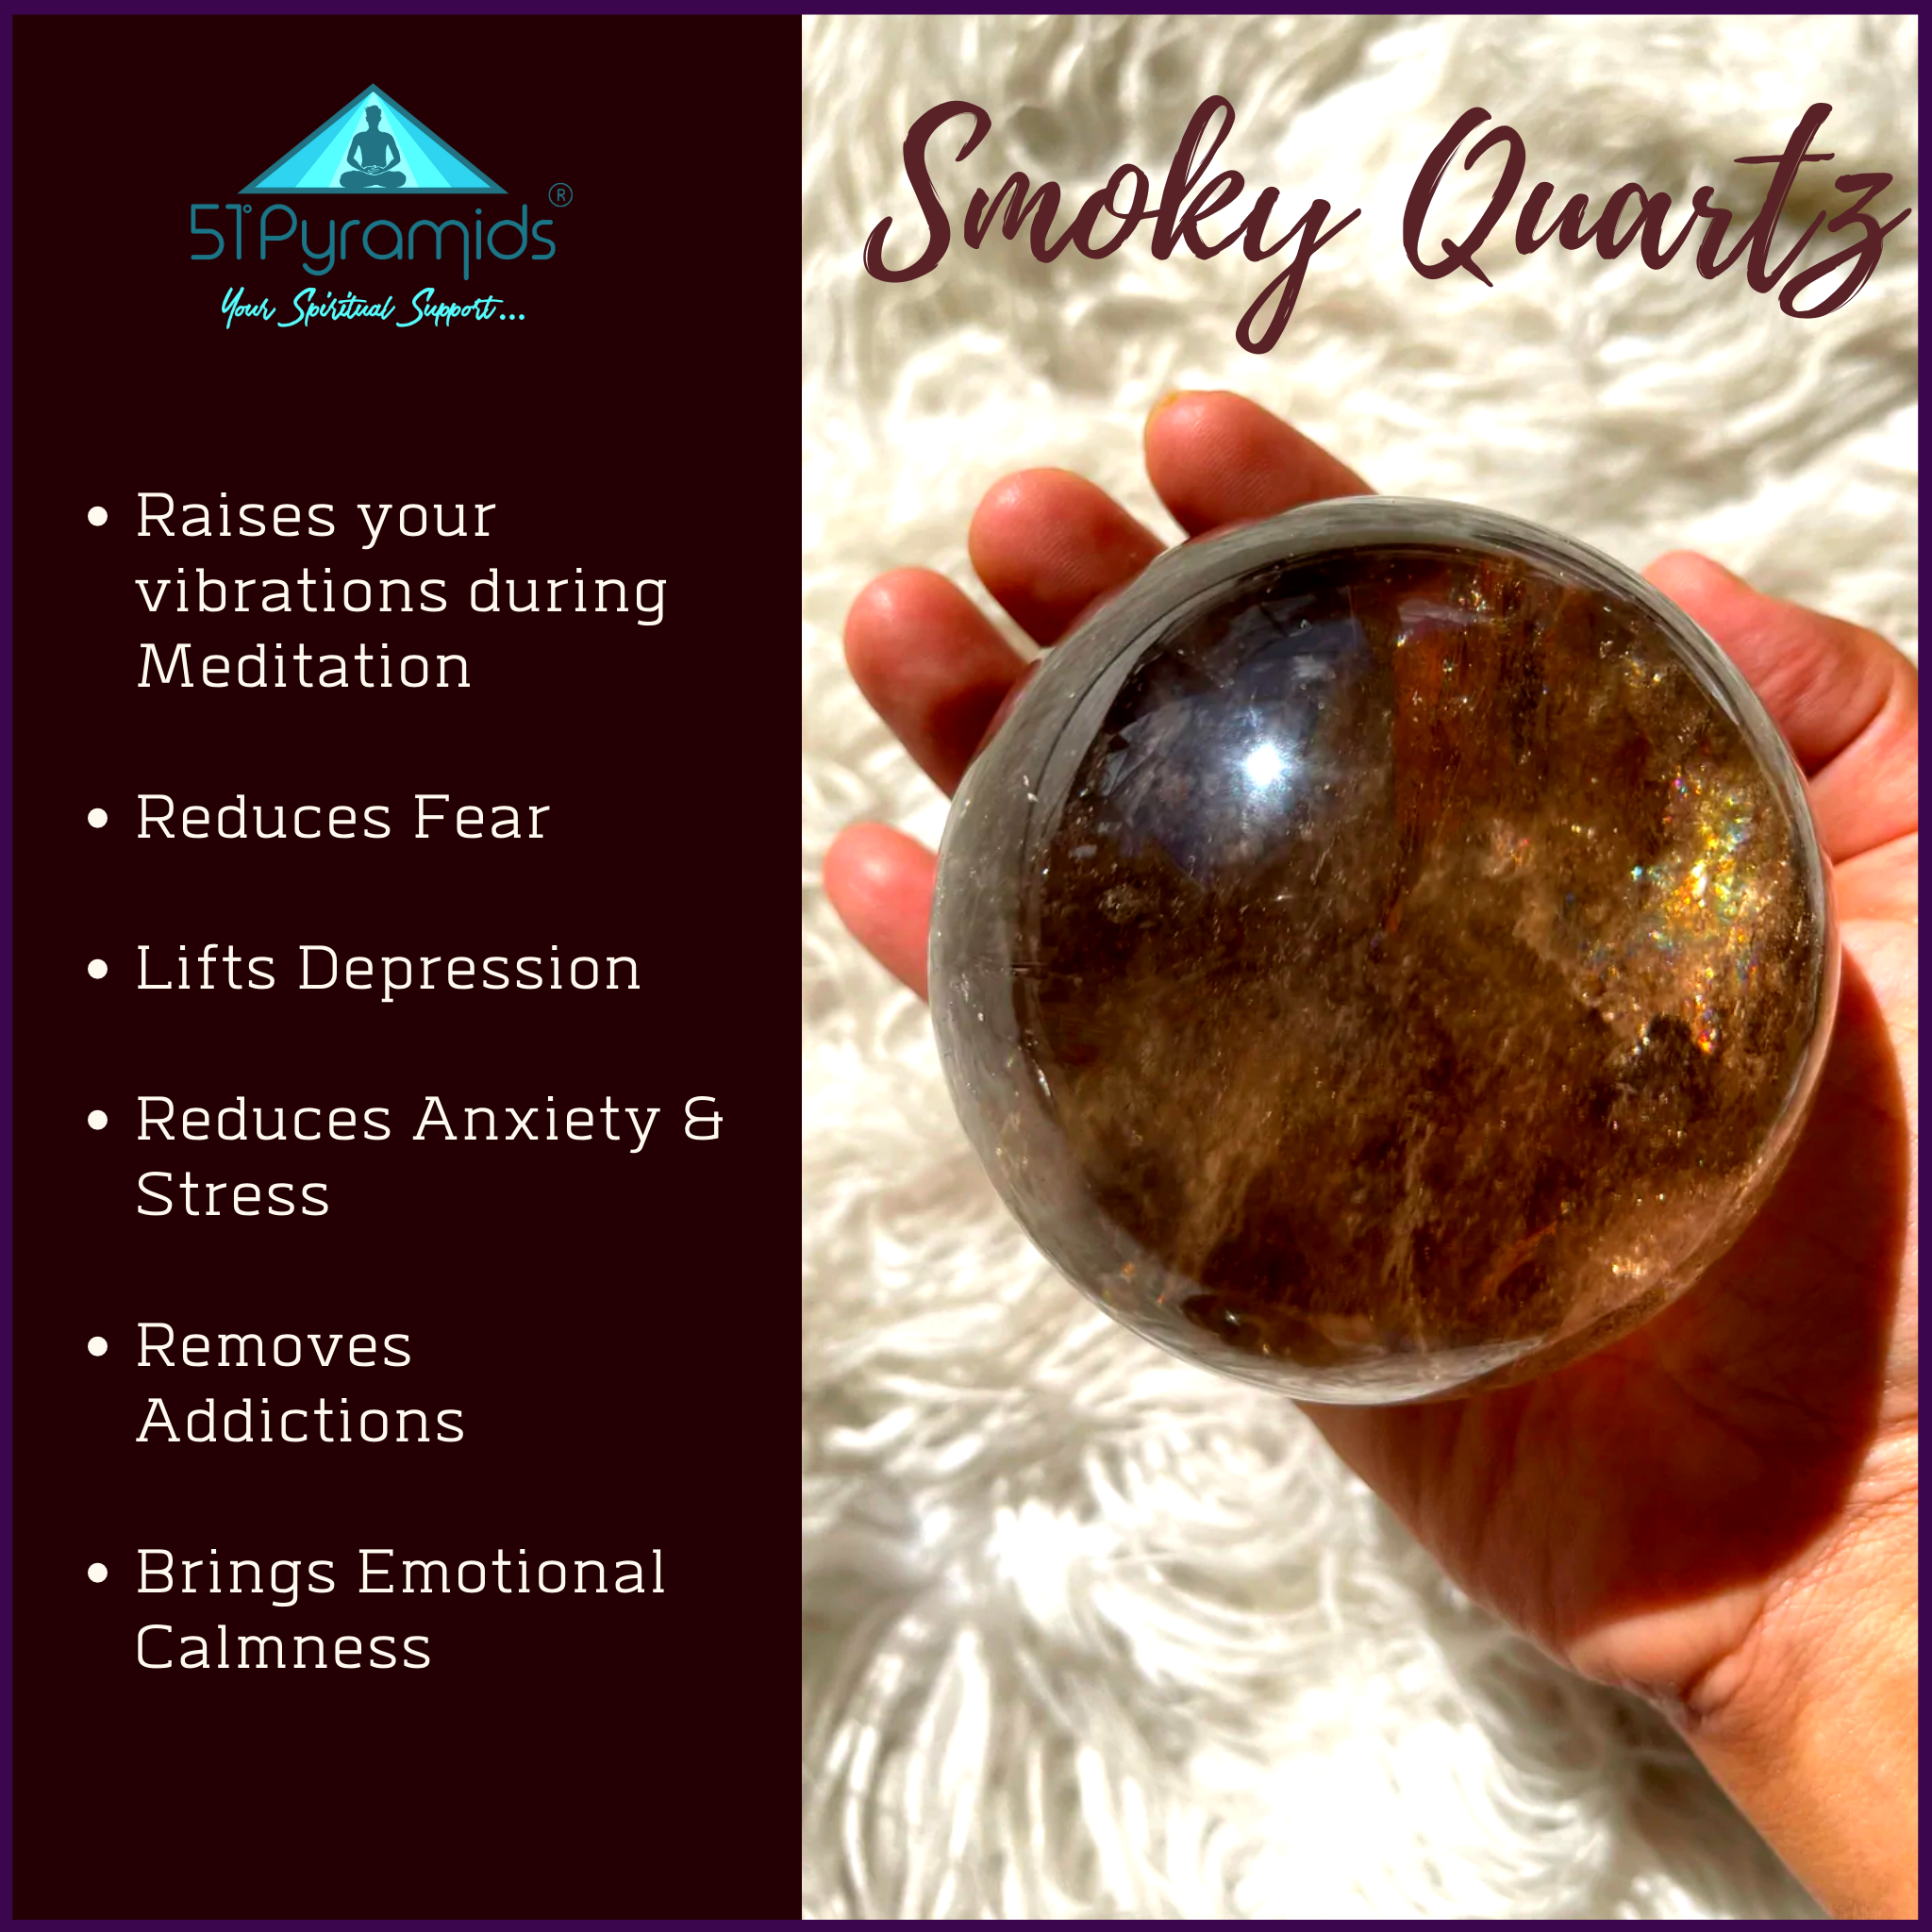 Smoky Quartz Crystal Sphere For Achieving Nirvana State In Meditation - 0